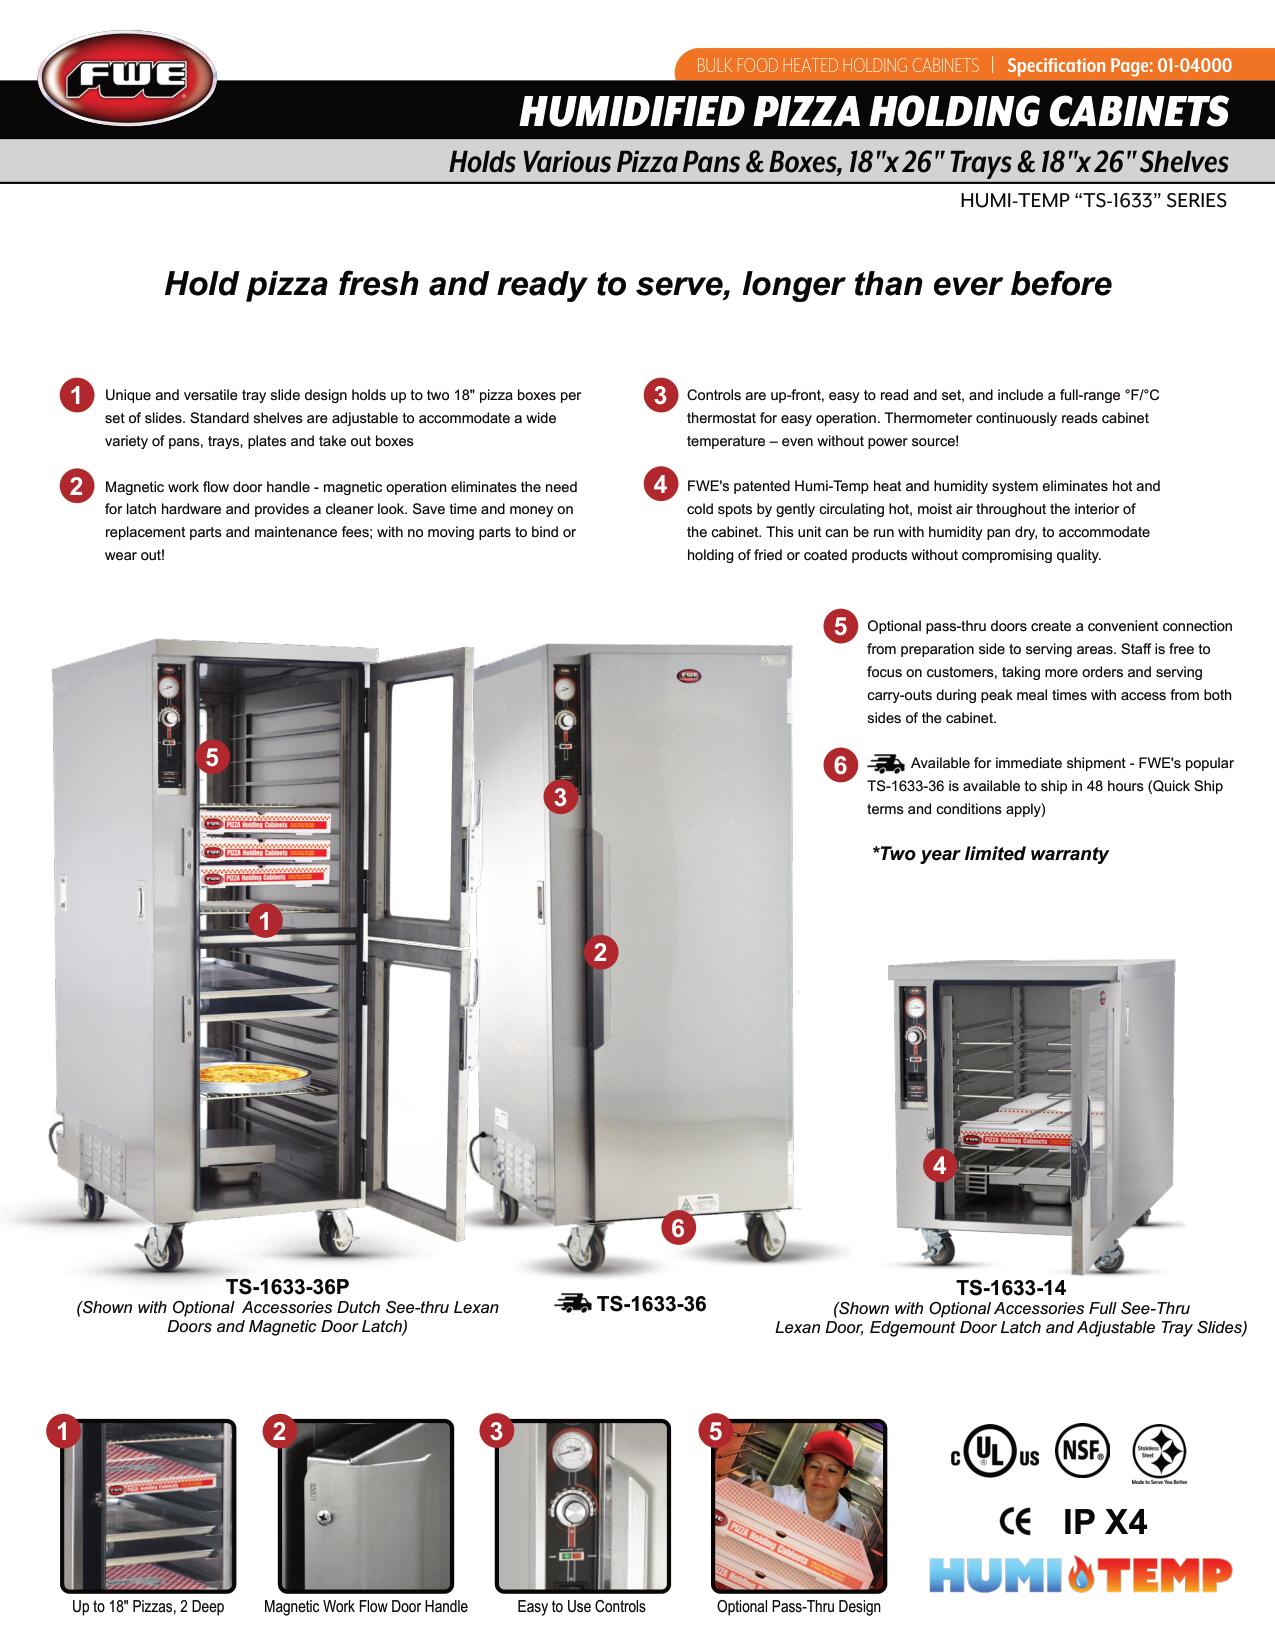 HUMIDIFIED PIZZA HOLDING CABINET | FWE | Model # TS-16633-36P | 120 Volt